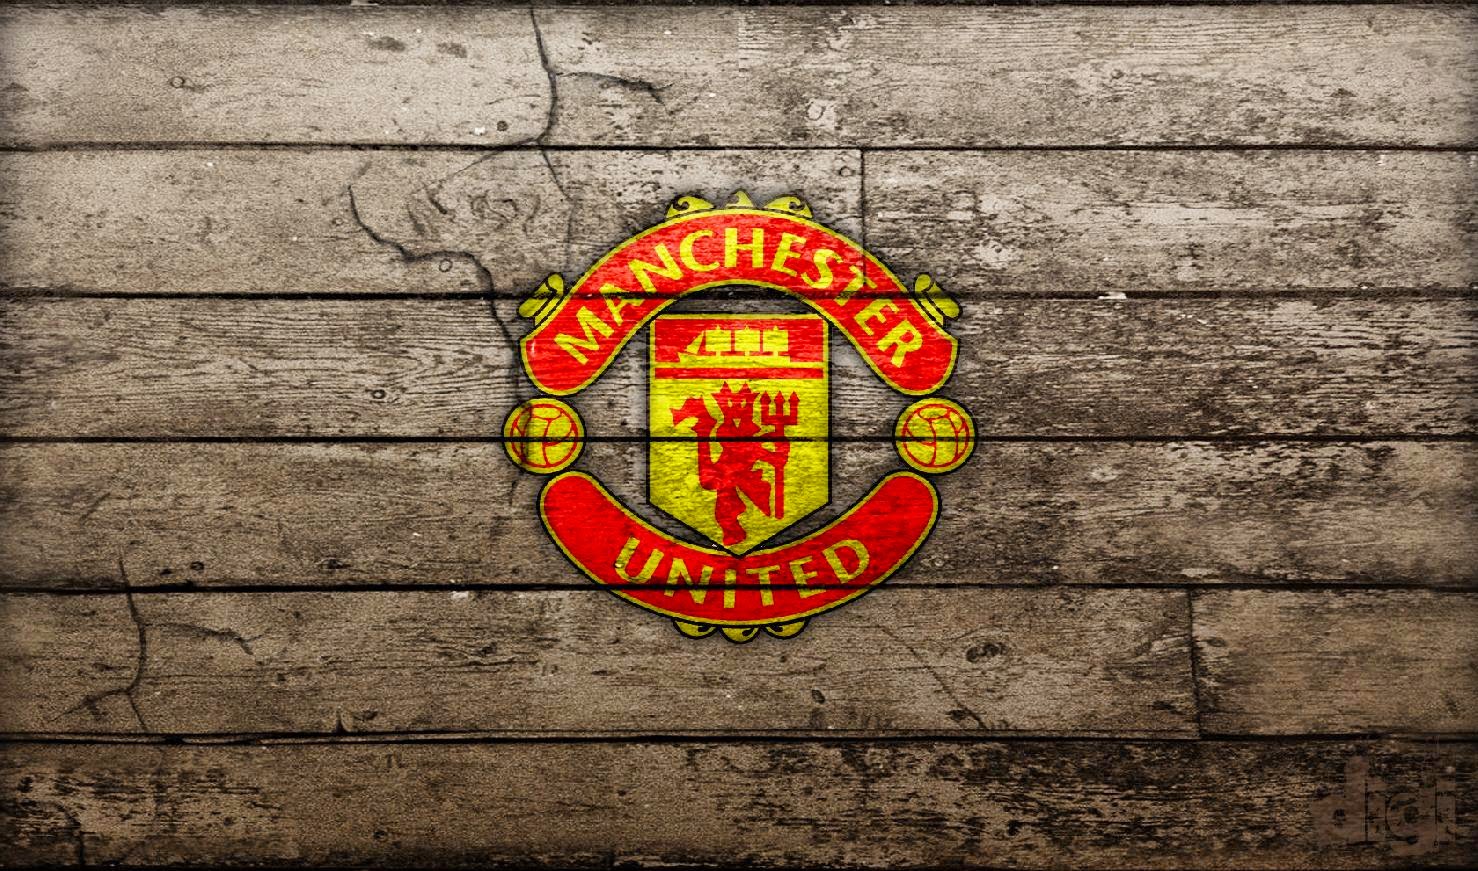 Manchester United HD Wallpaper Image New